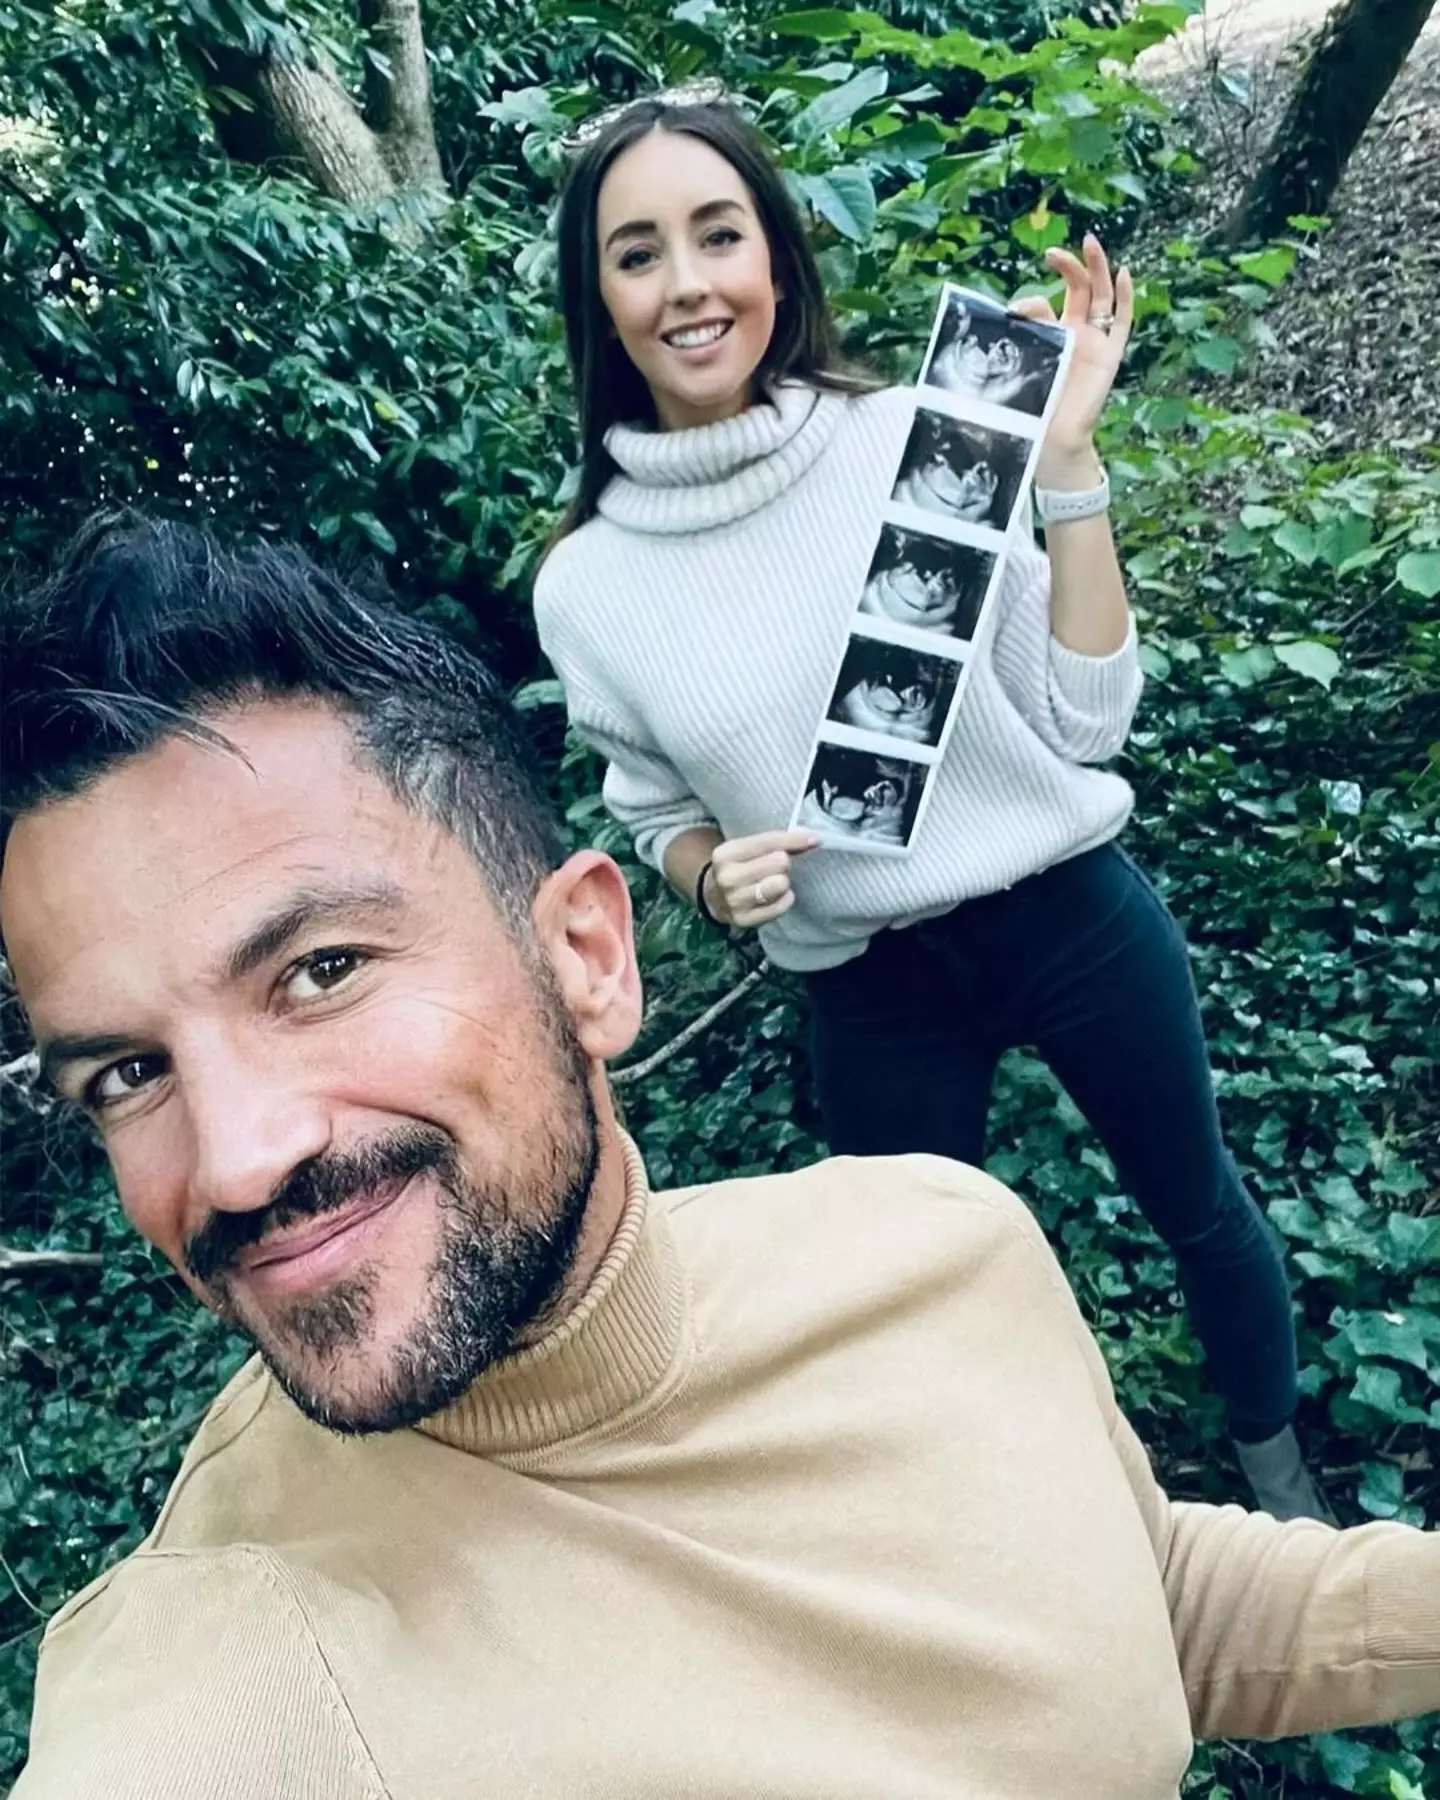 Peter Andre and wife Emily MacDonagh took to Instagram to share the exciting news.